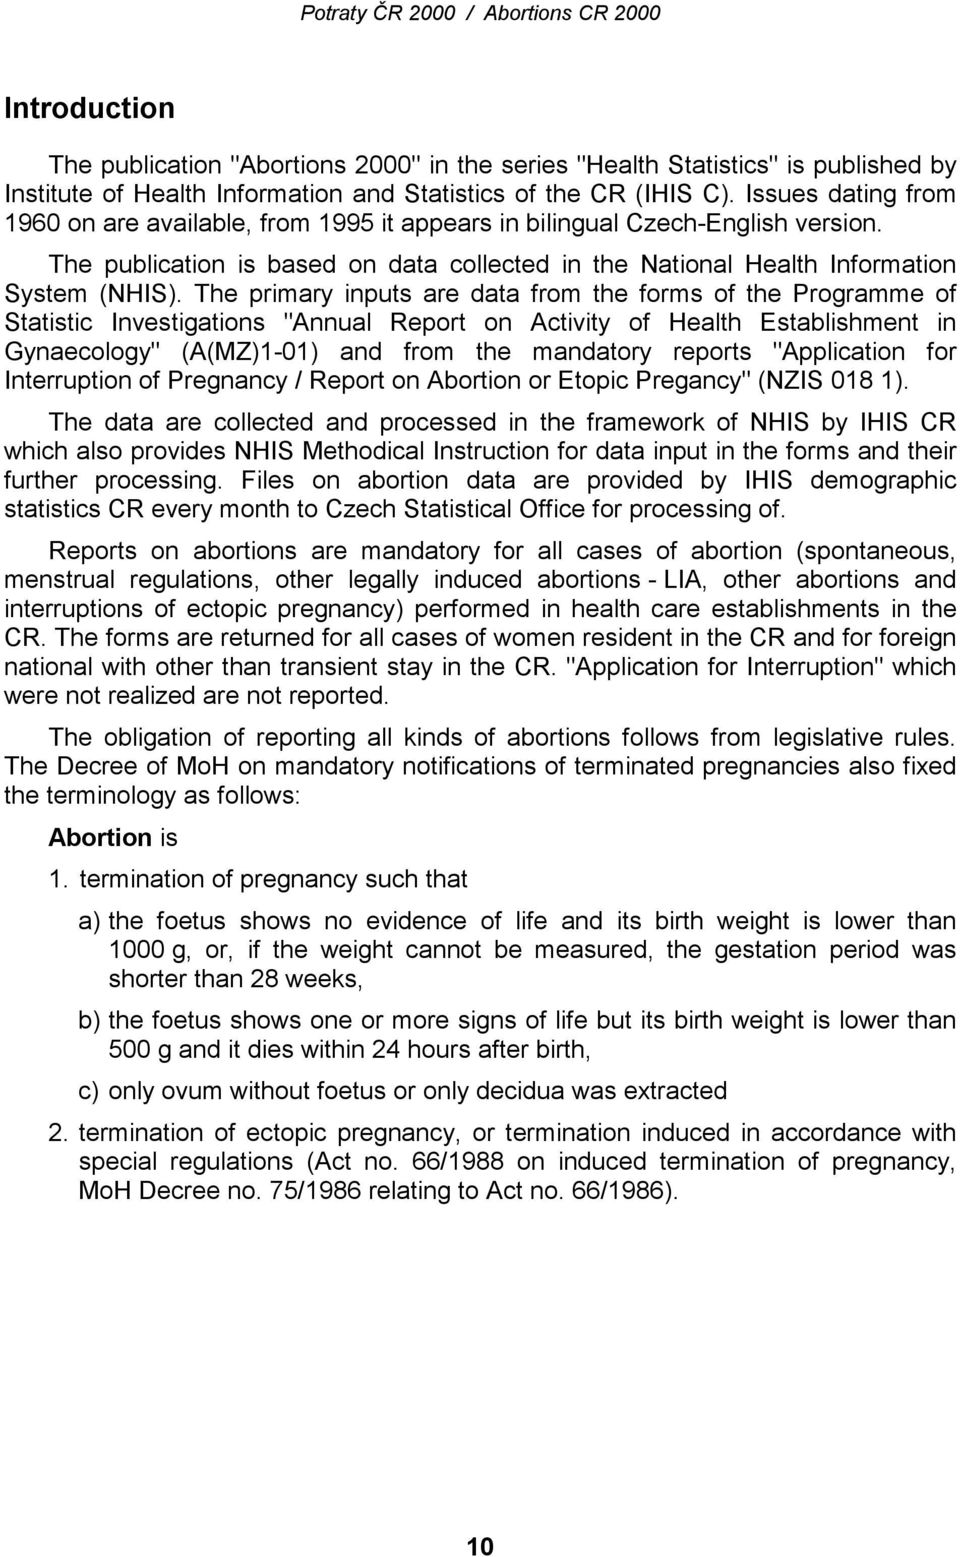 The primary inputs are data from the forms of the Programme of Statistic Investigations "Annual Report on Activity of Health Establishment in Gynaecology" (A(MZ)1-01) and from the mandatory reports